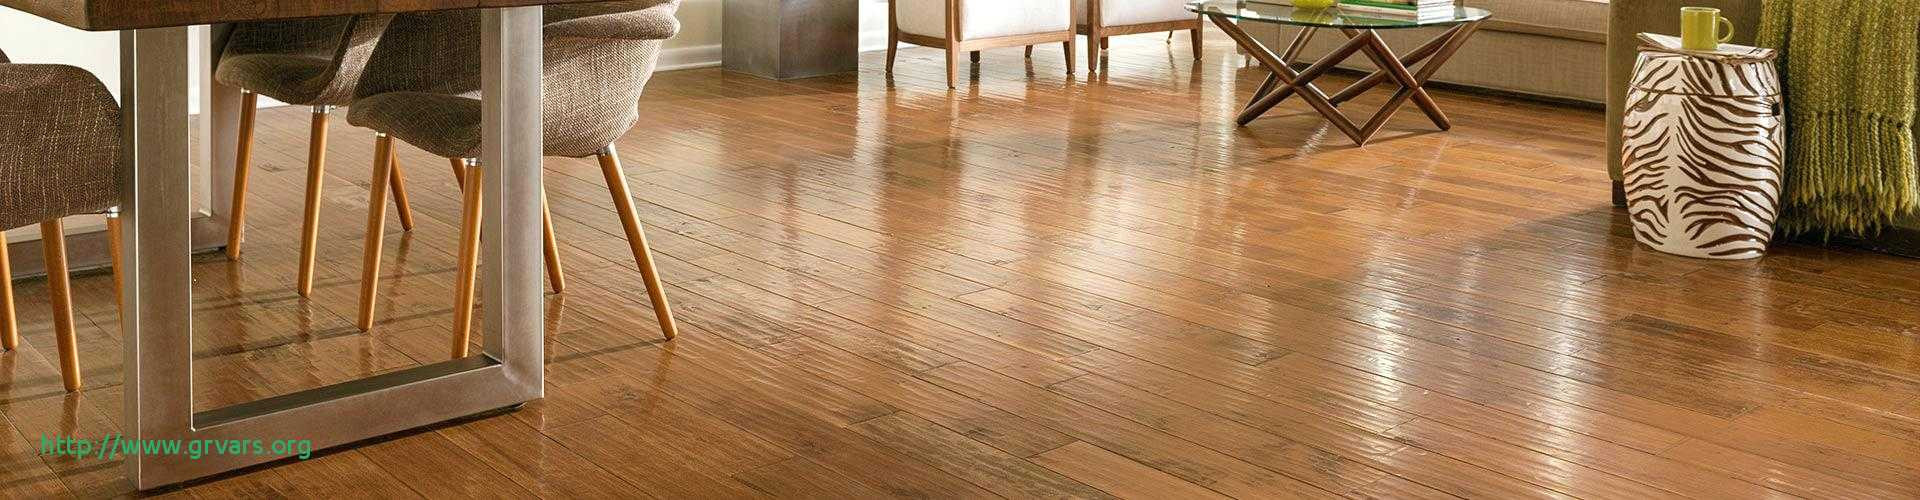 21 Wonderful Can I Put Hardwood Floor Over Tile 2024 free download can i put hardwood floor over tile of how much does lowes charge to install hardwood flooring inspirant od within how much does lowes charge to install hardwood flooring inspirant od grain t